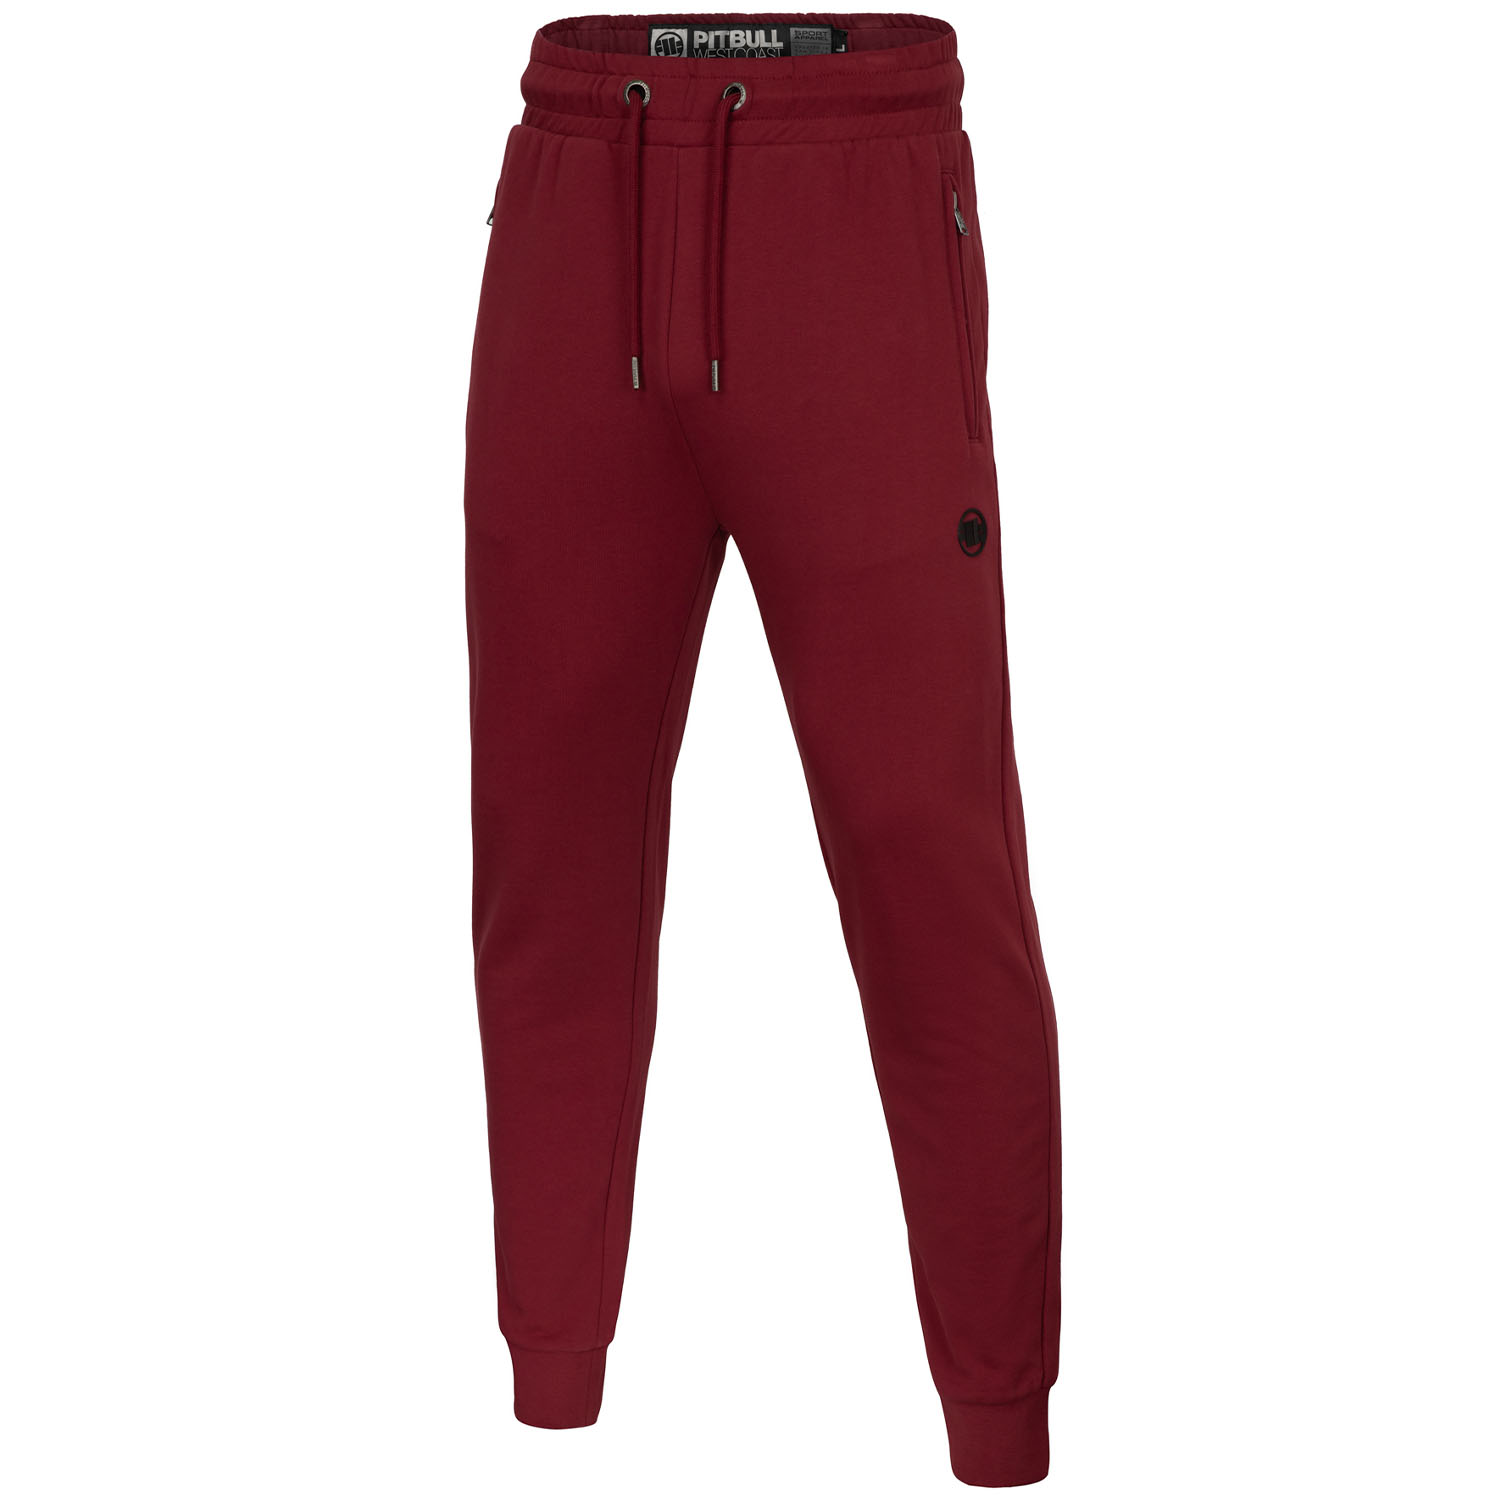 Pit Bull West Coast, Jogging Pants, Everts, wine red, S